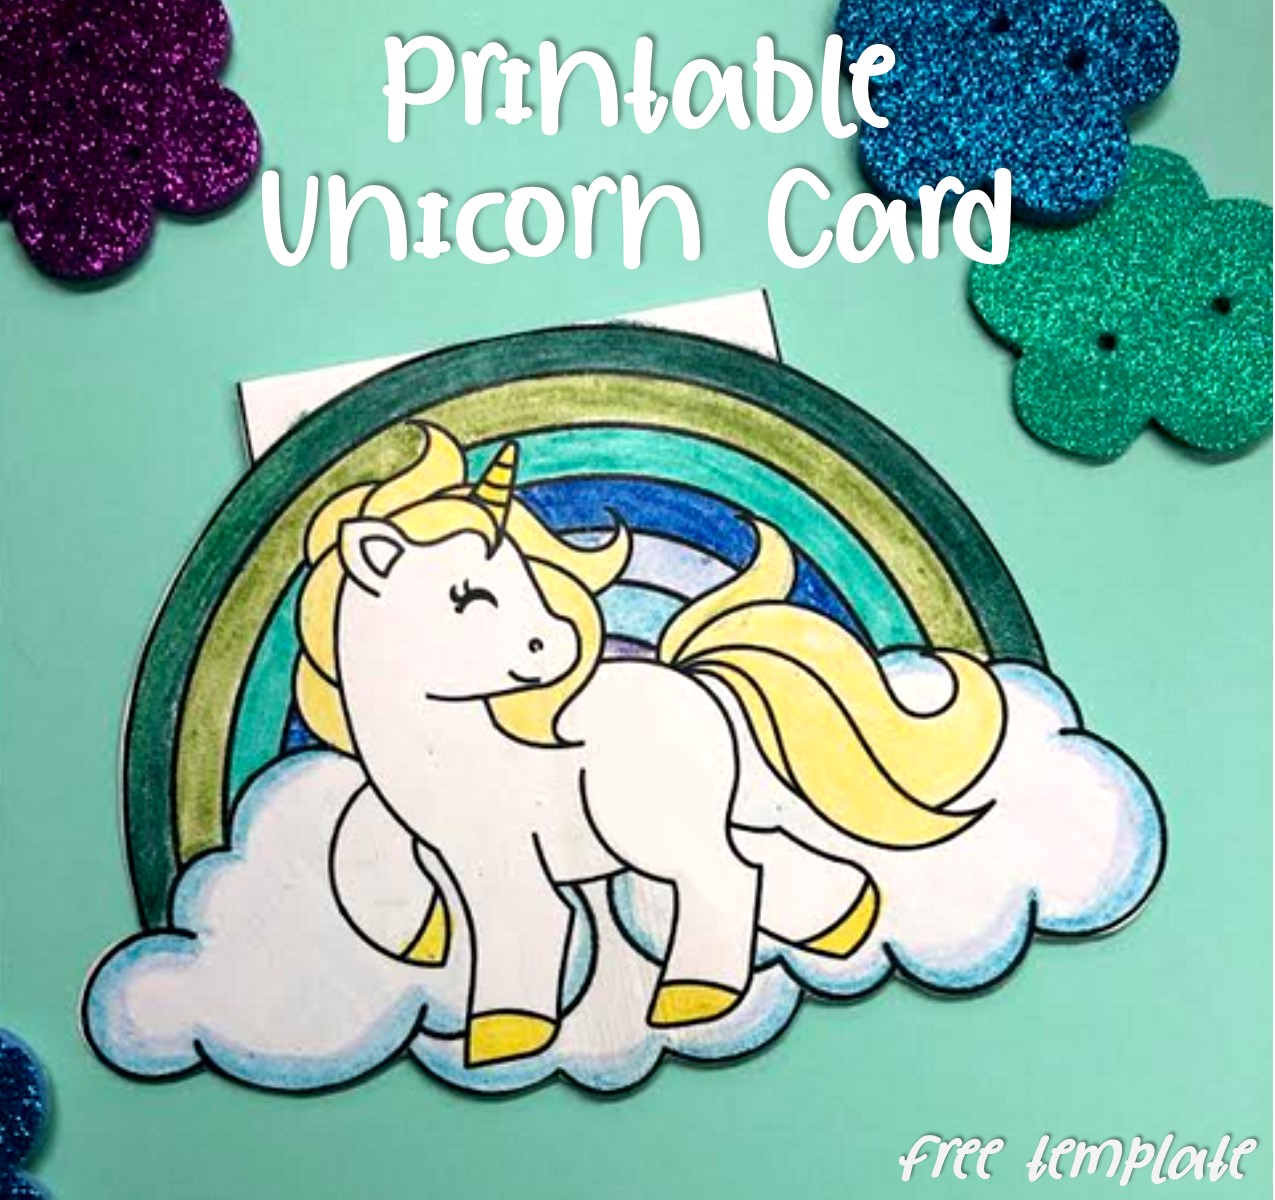 printable-unicorn-card-the-learning-curve